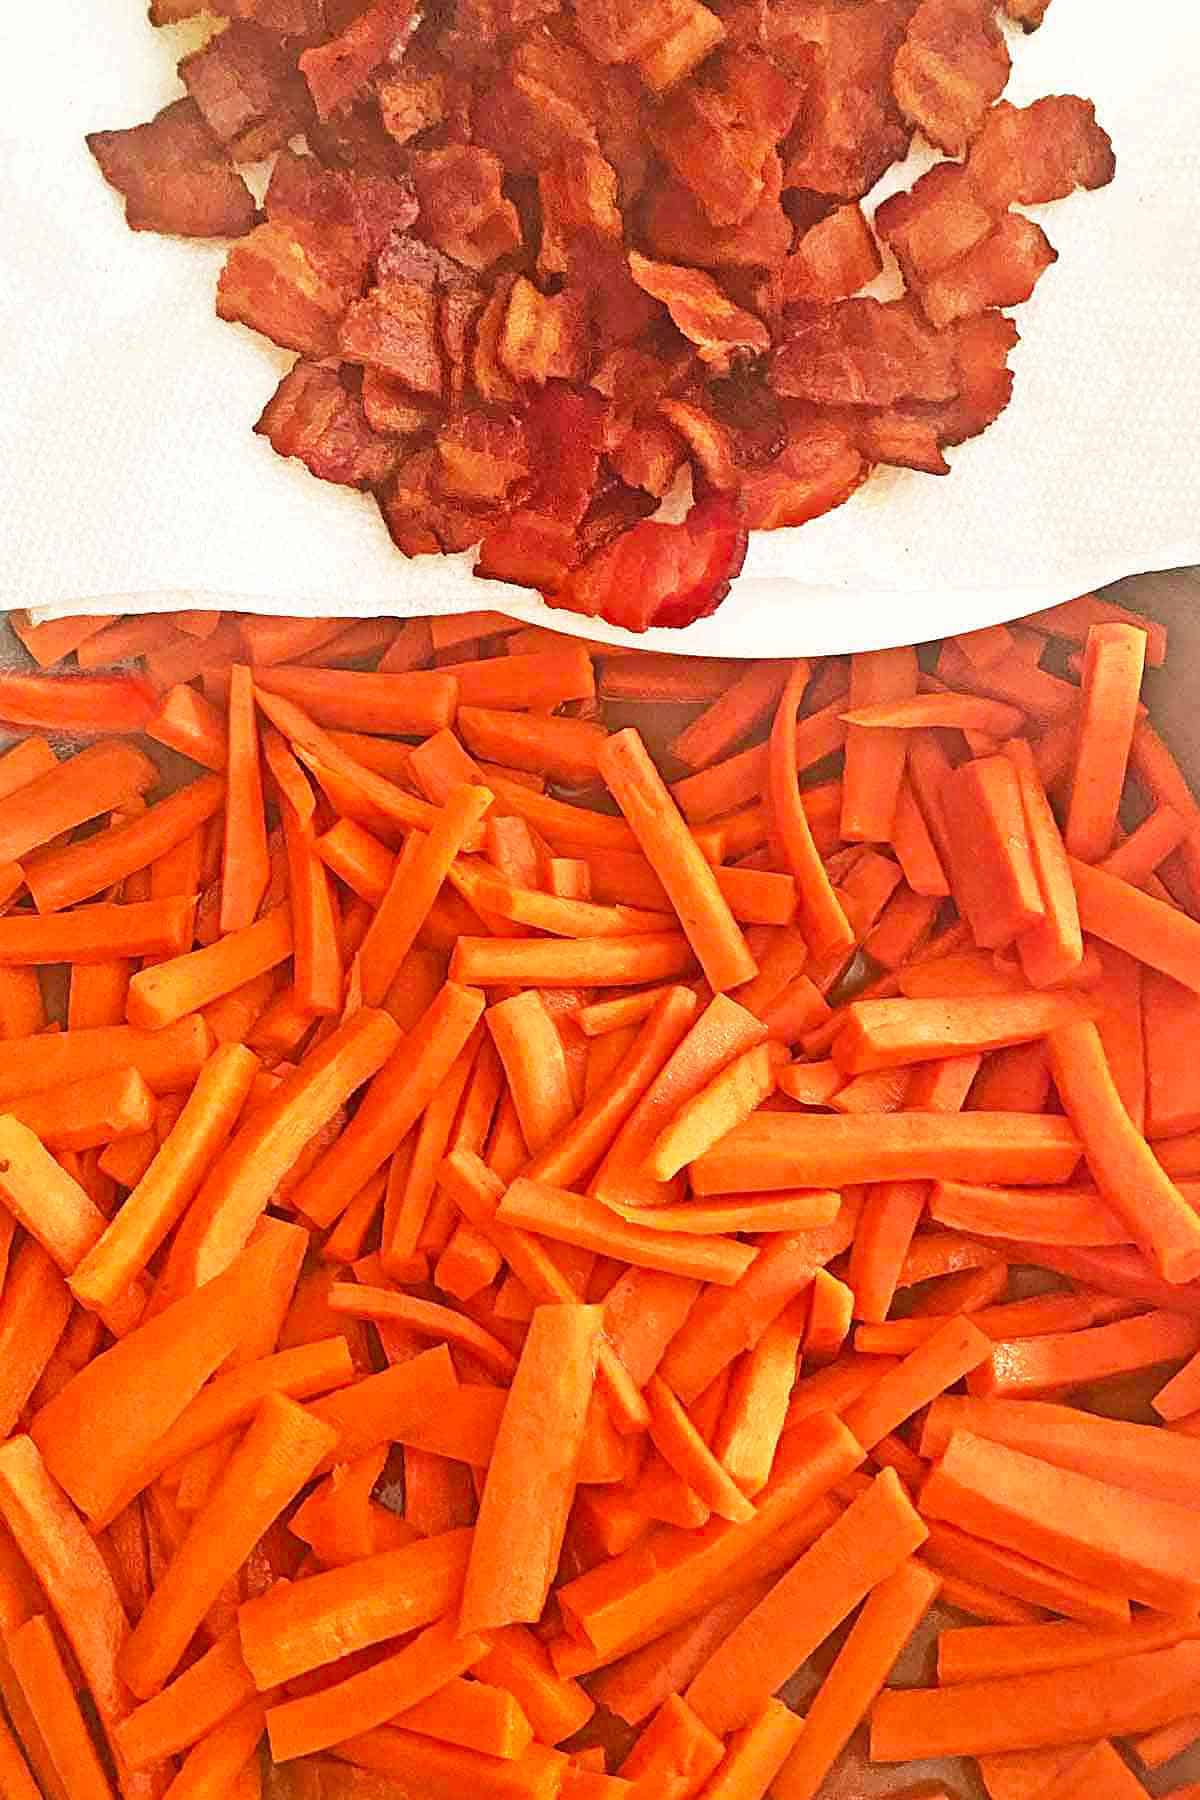 Adding cooked bacon bits to the maple glazed carrots.